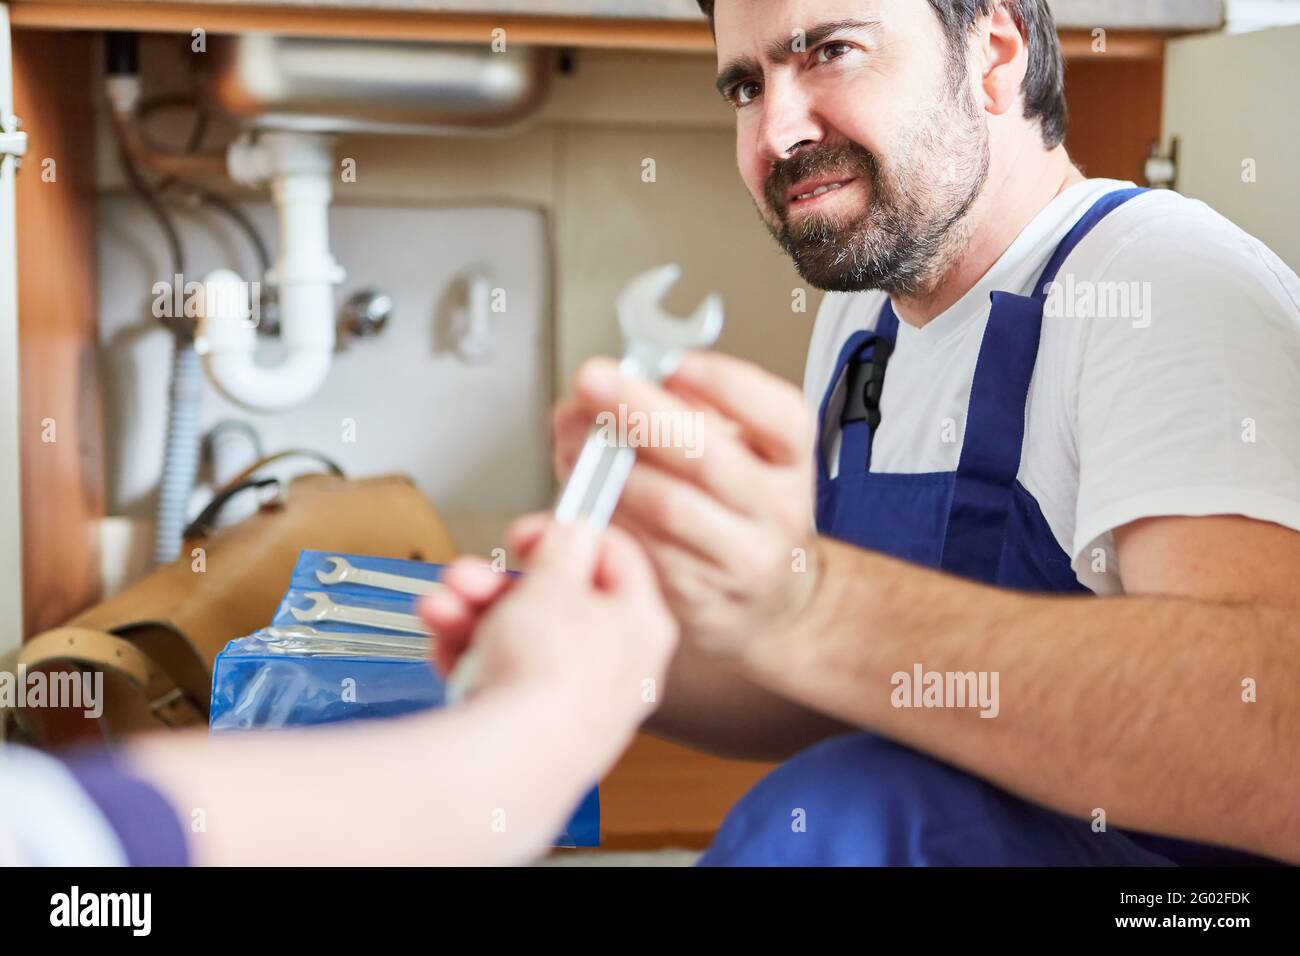 Do-it-yourselfer looks uncertain while repairing a sink in the kitchen Stock Photo